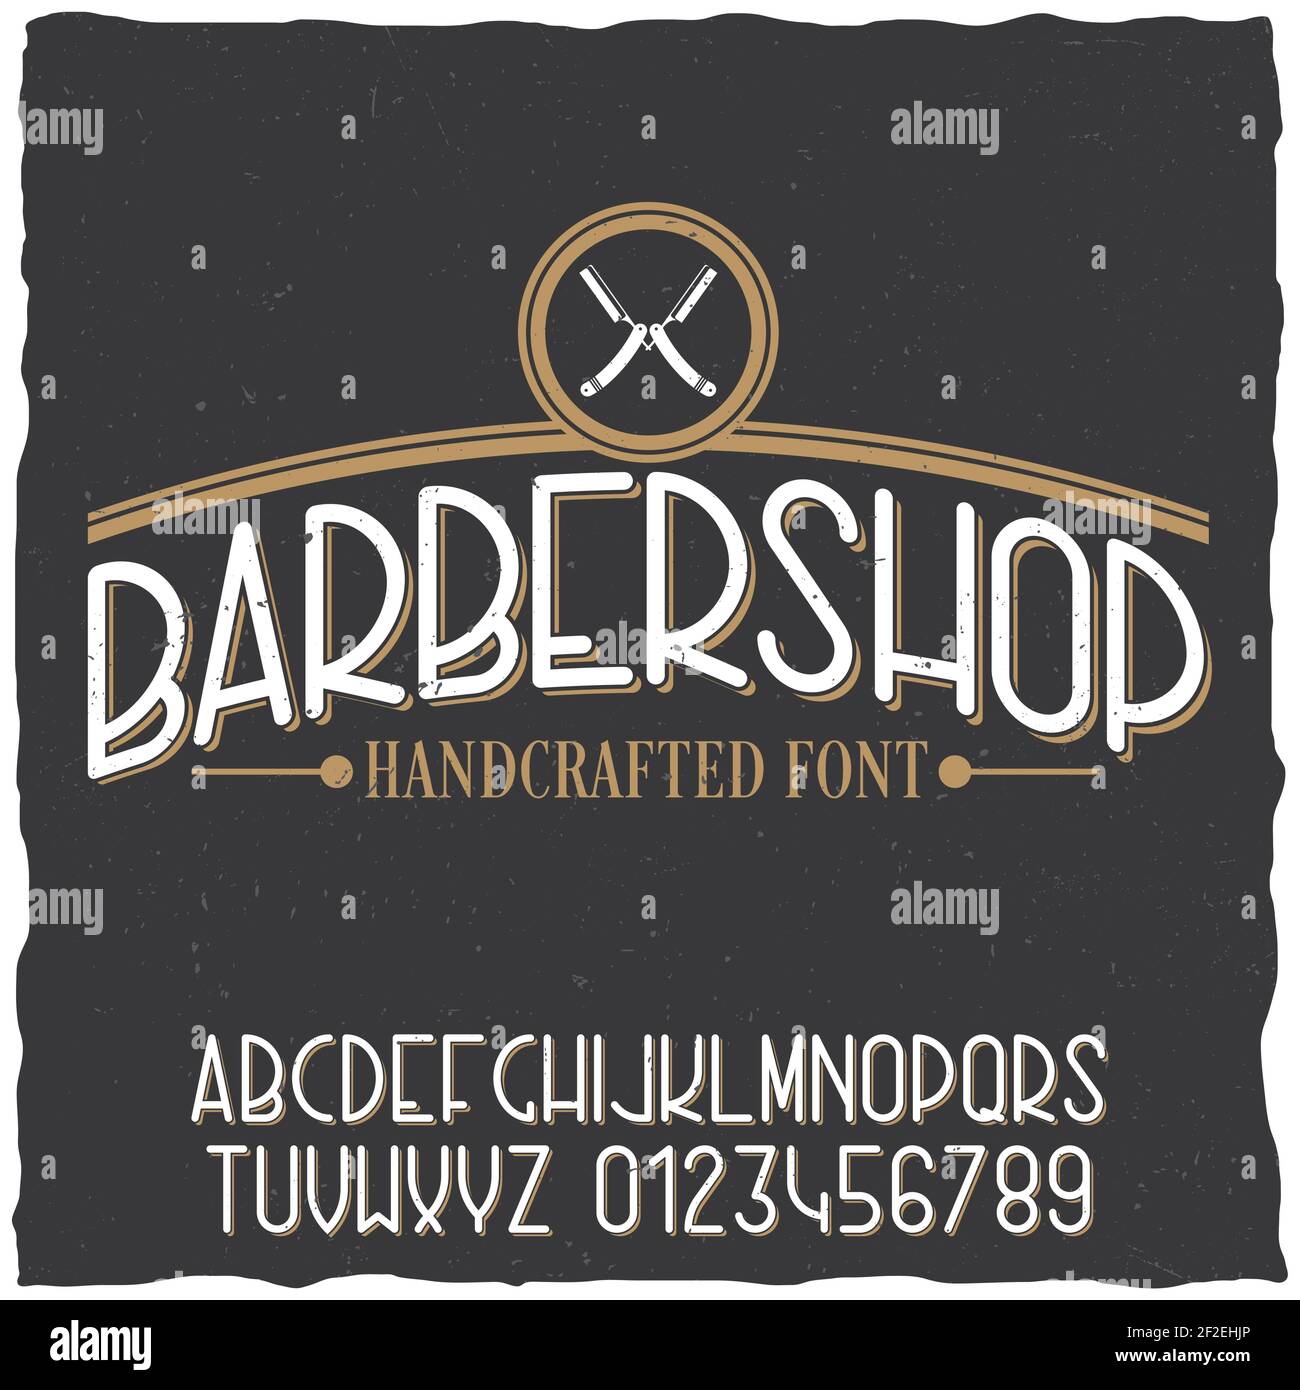 Barber shop typeface poster with sample label design on dusty background vector illustration Stock Vector